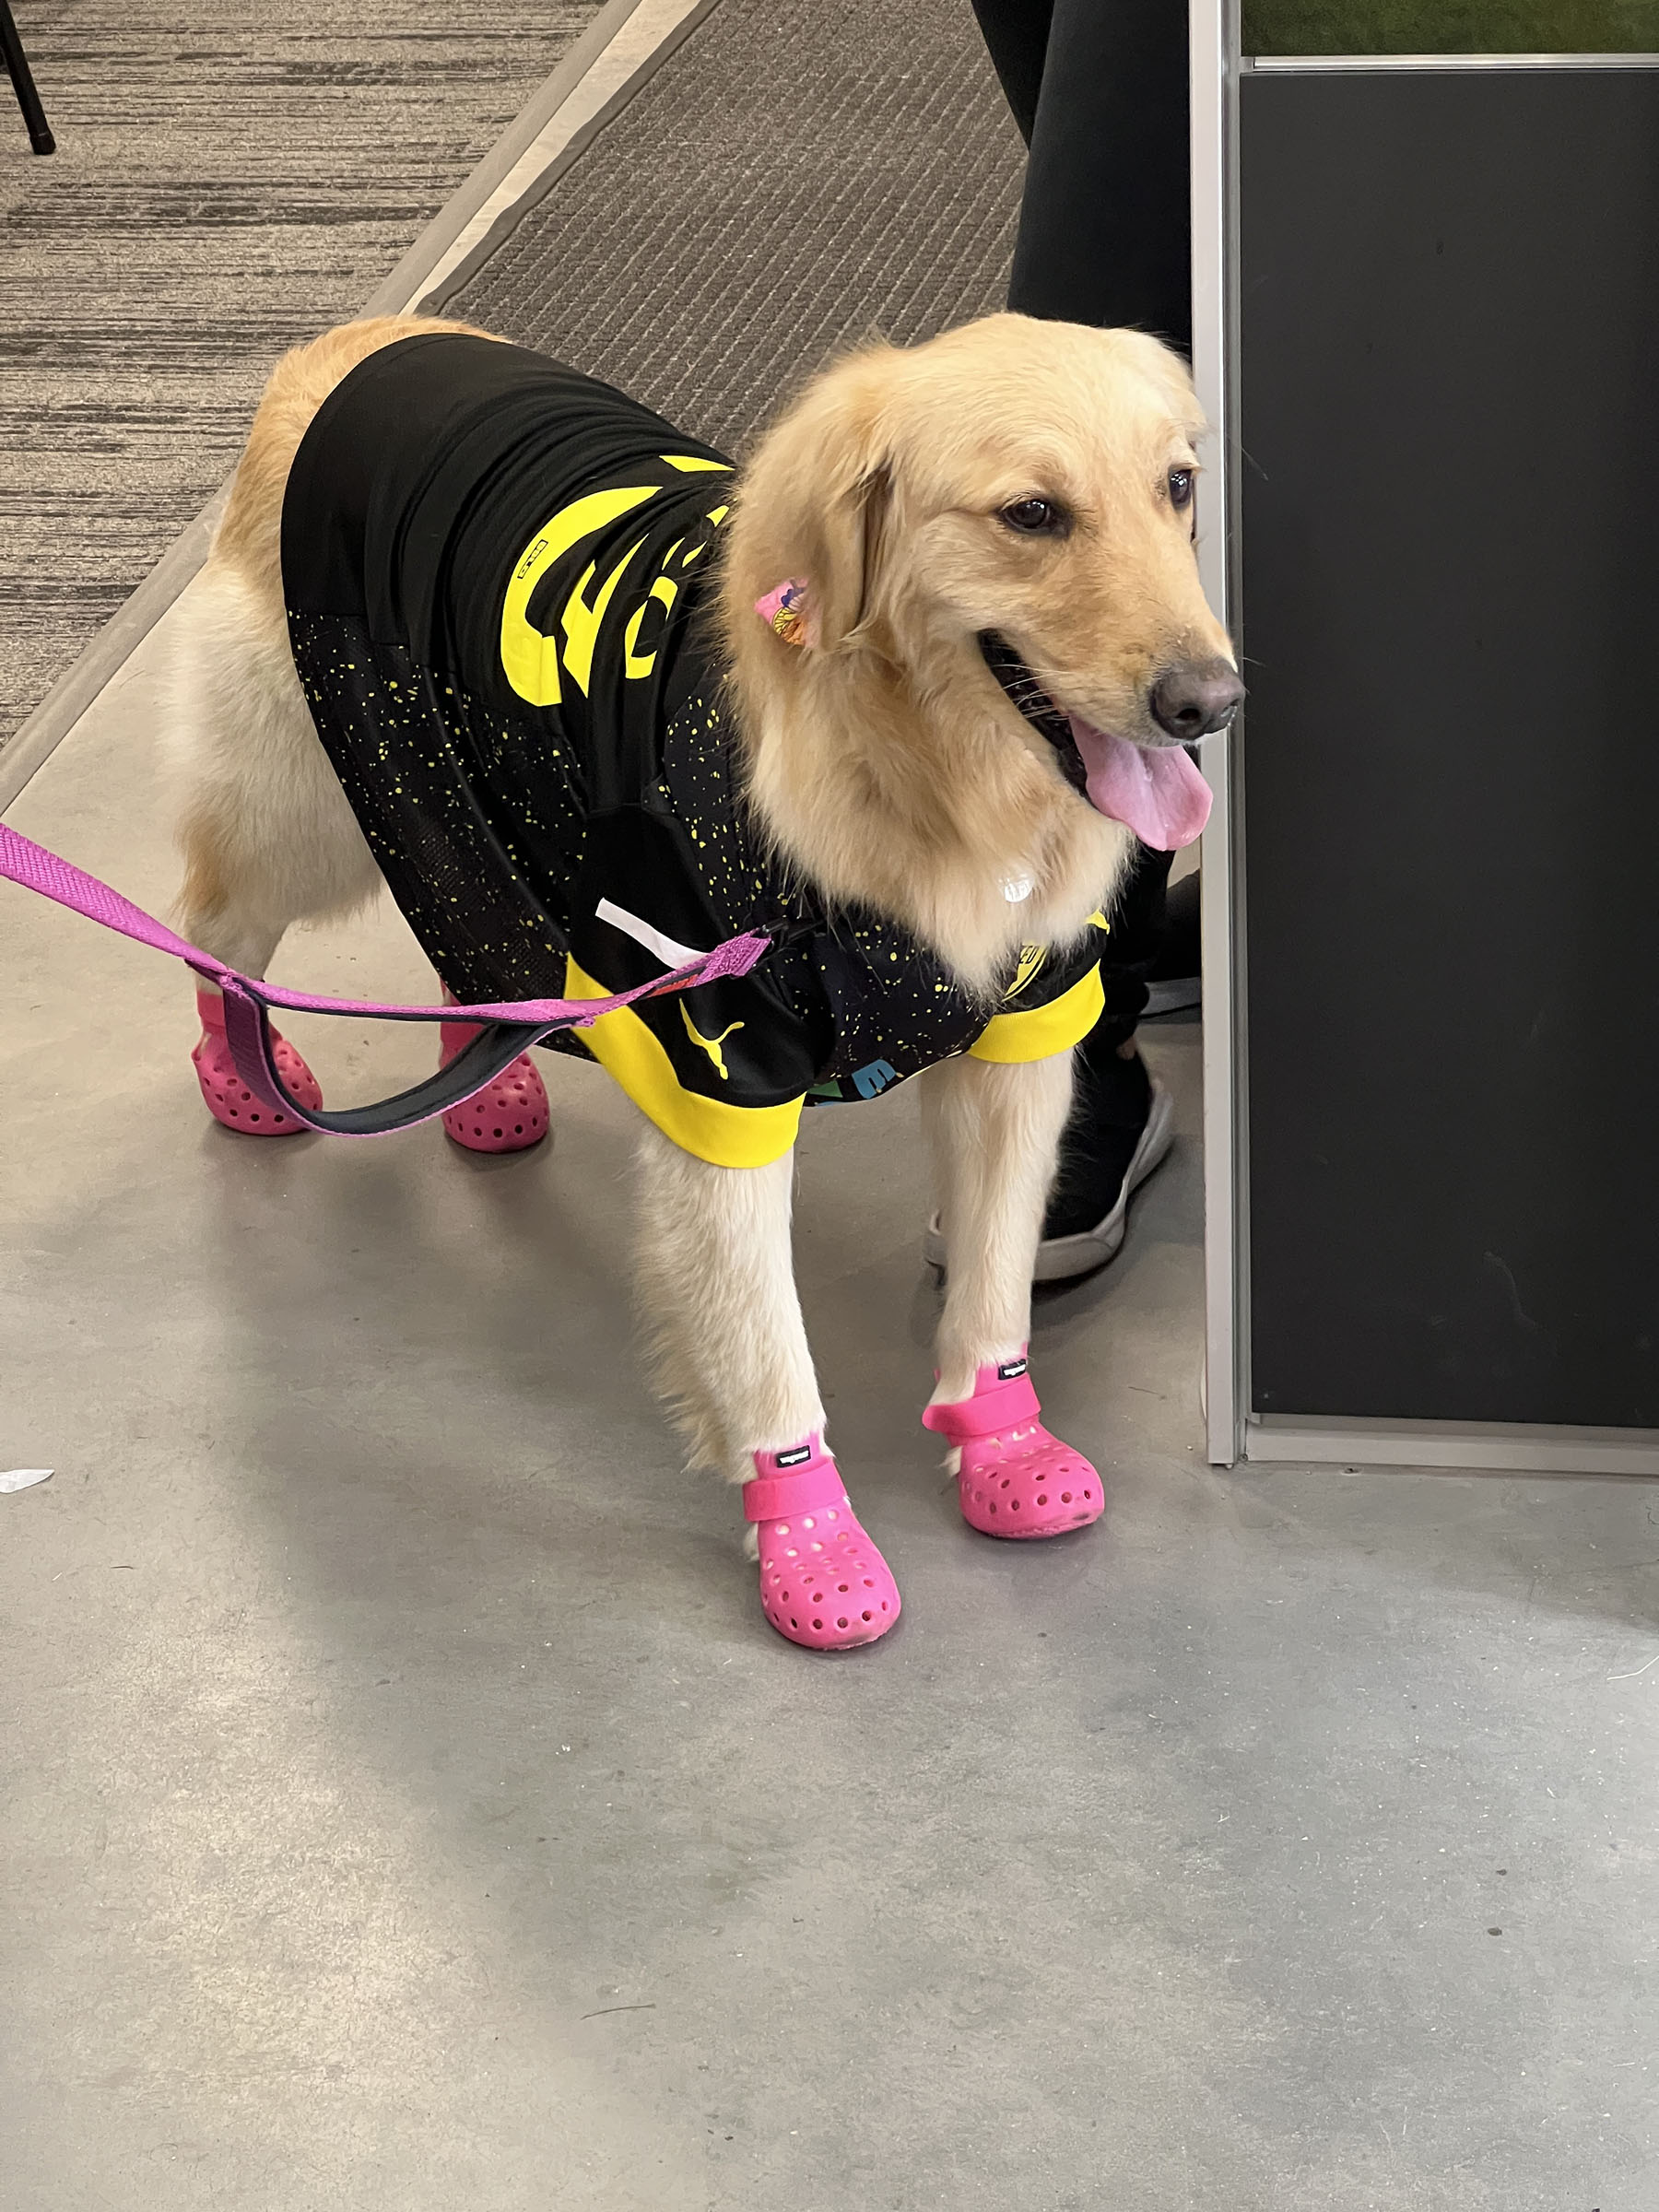 Choco the dog, a golden lab, wearing a black jersey and pink Crocs